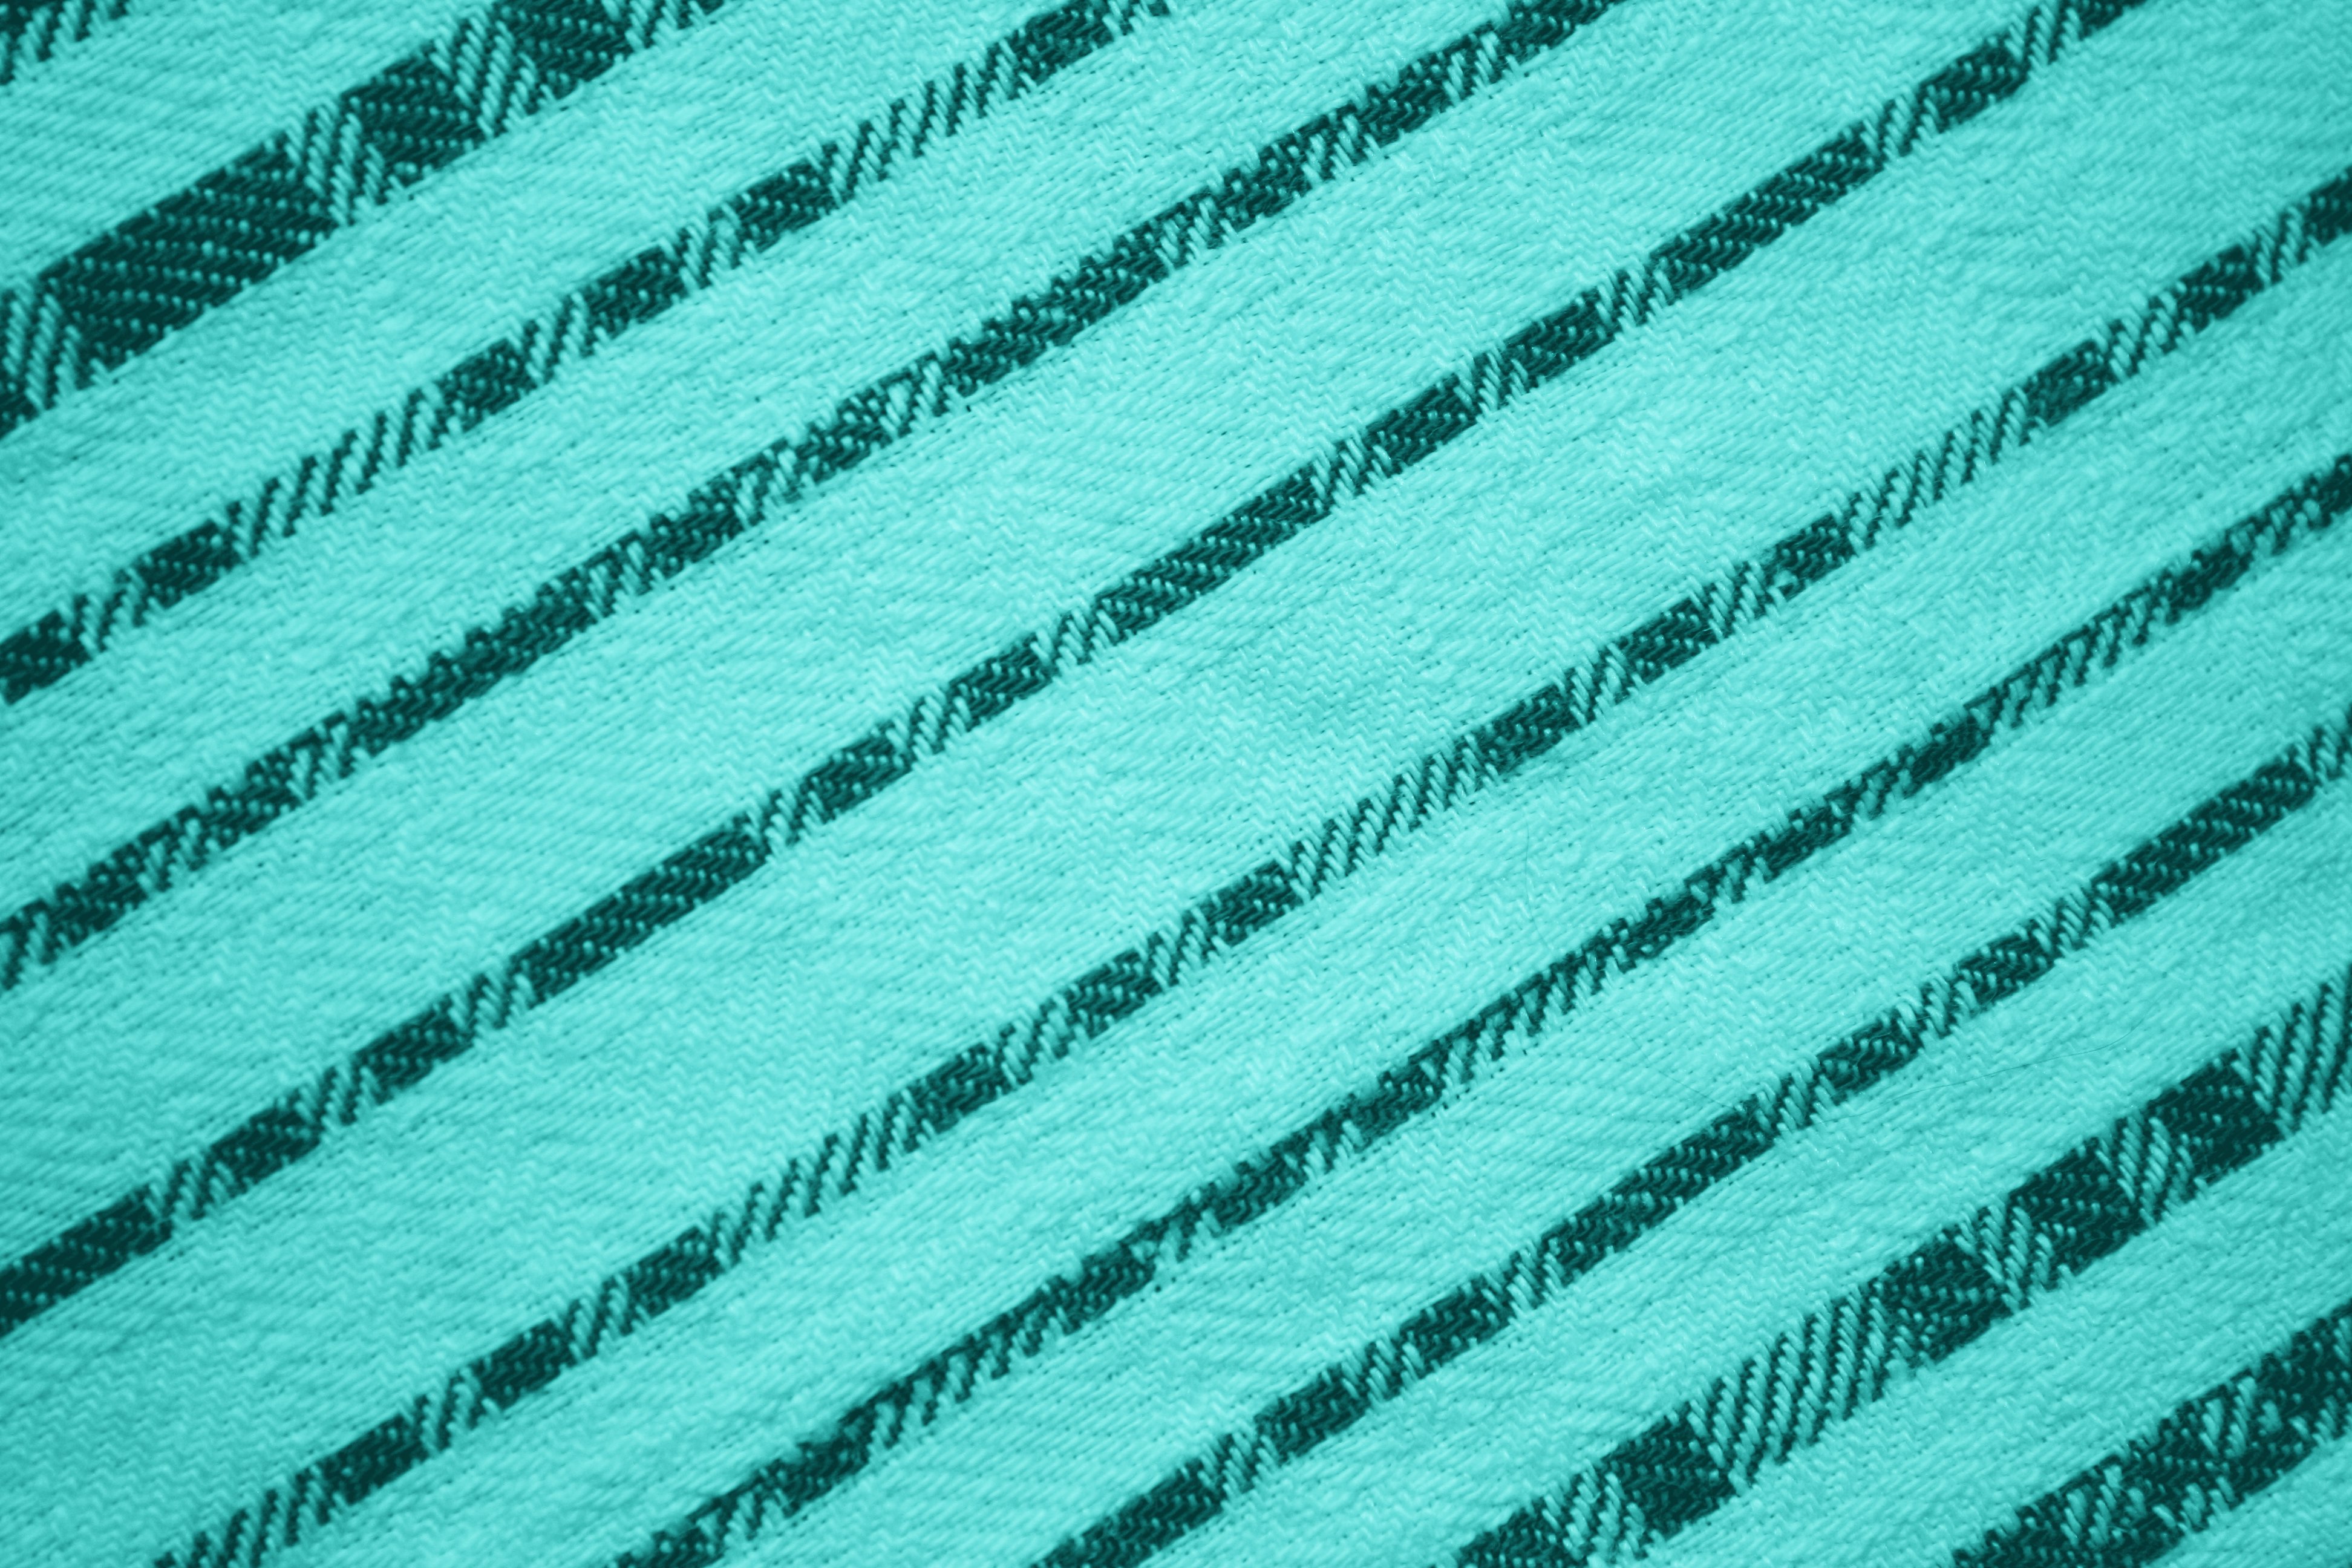 Teal Diagonal Stripes Fabric Texture Picture